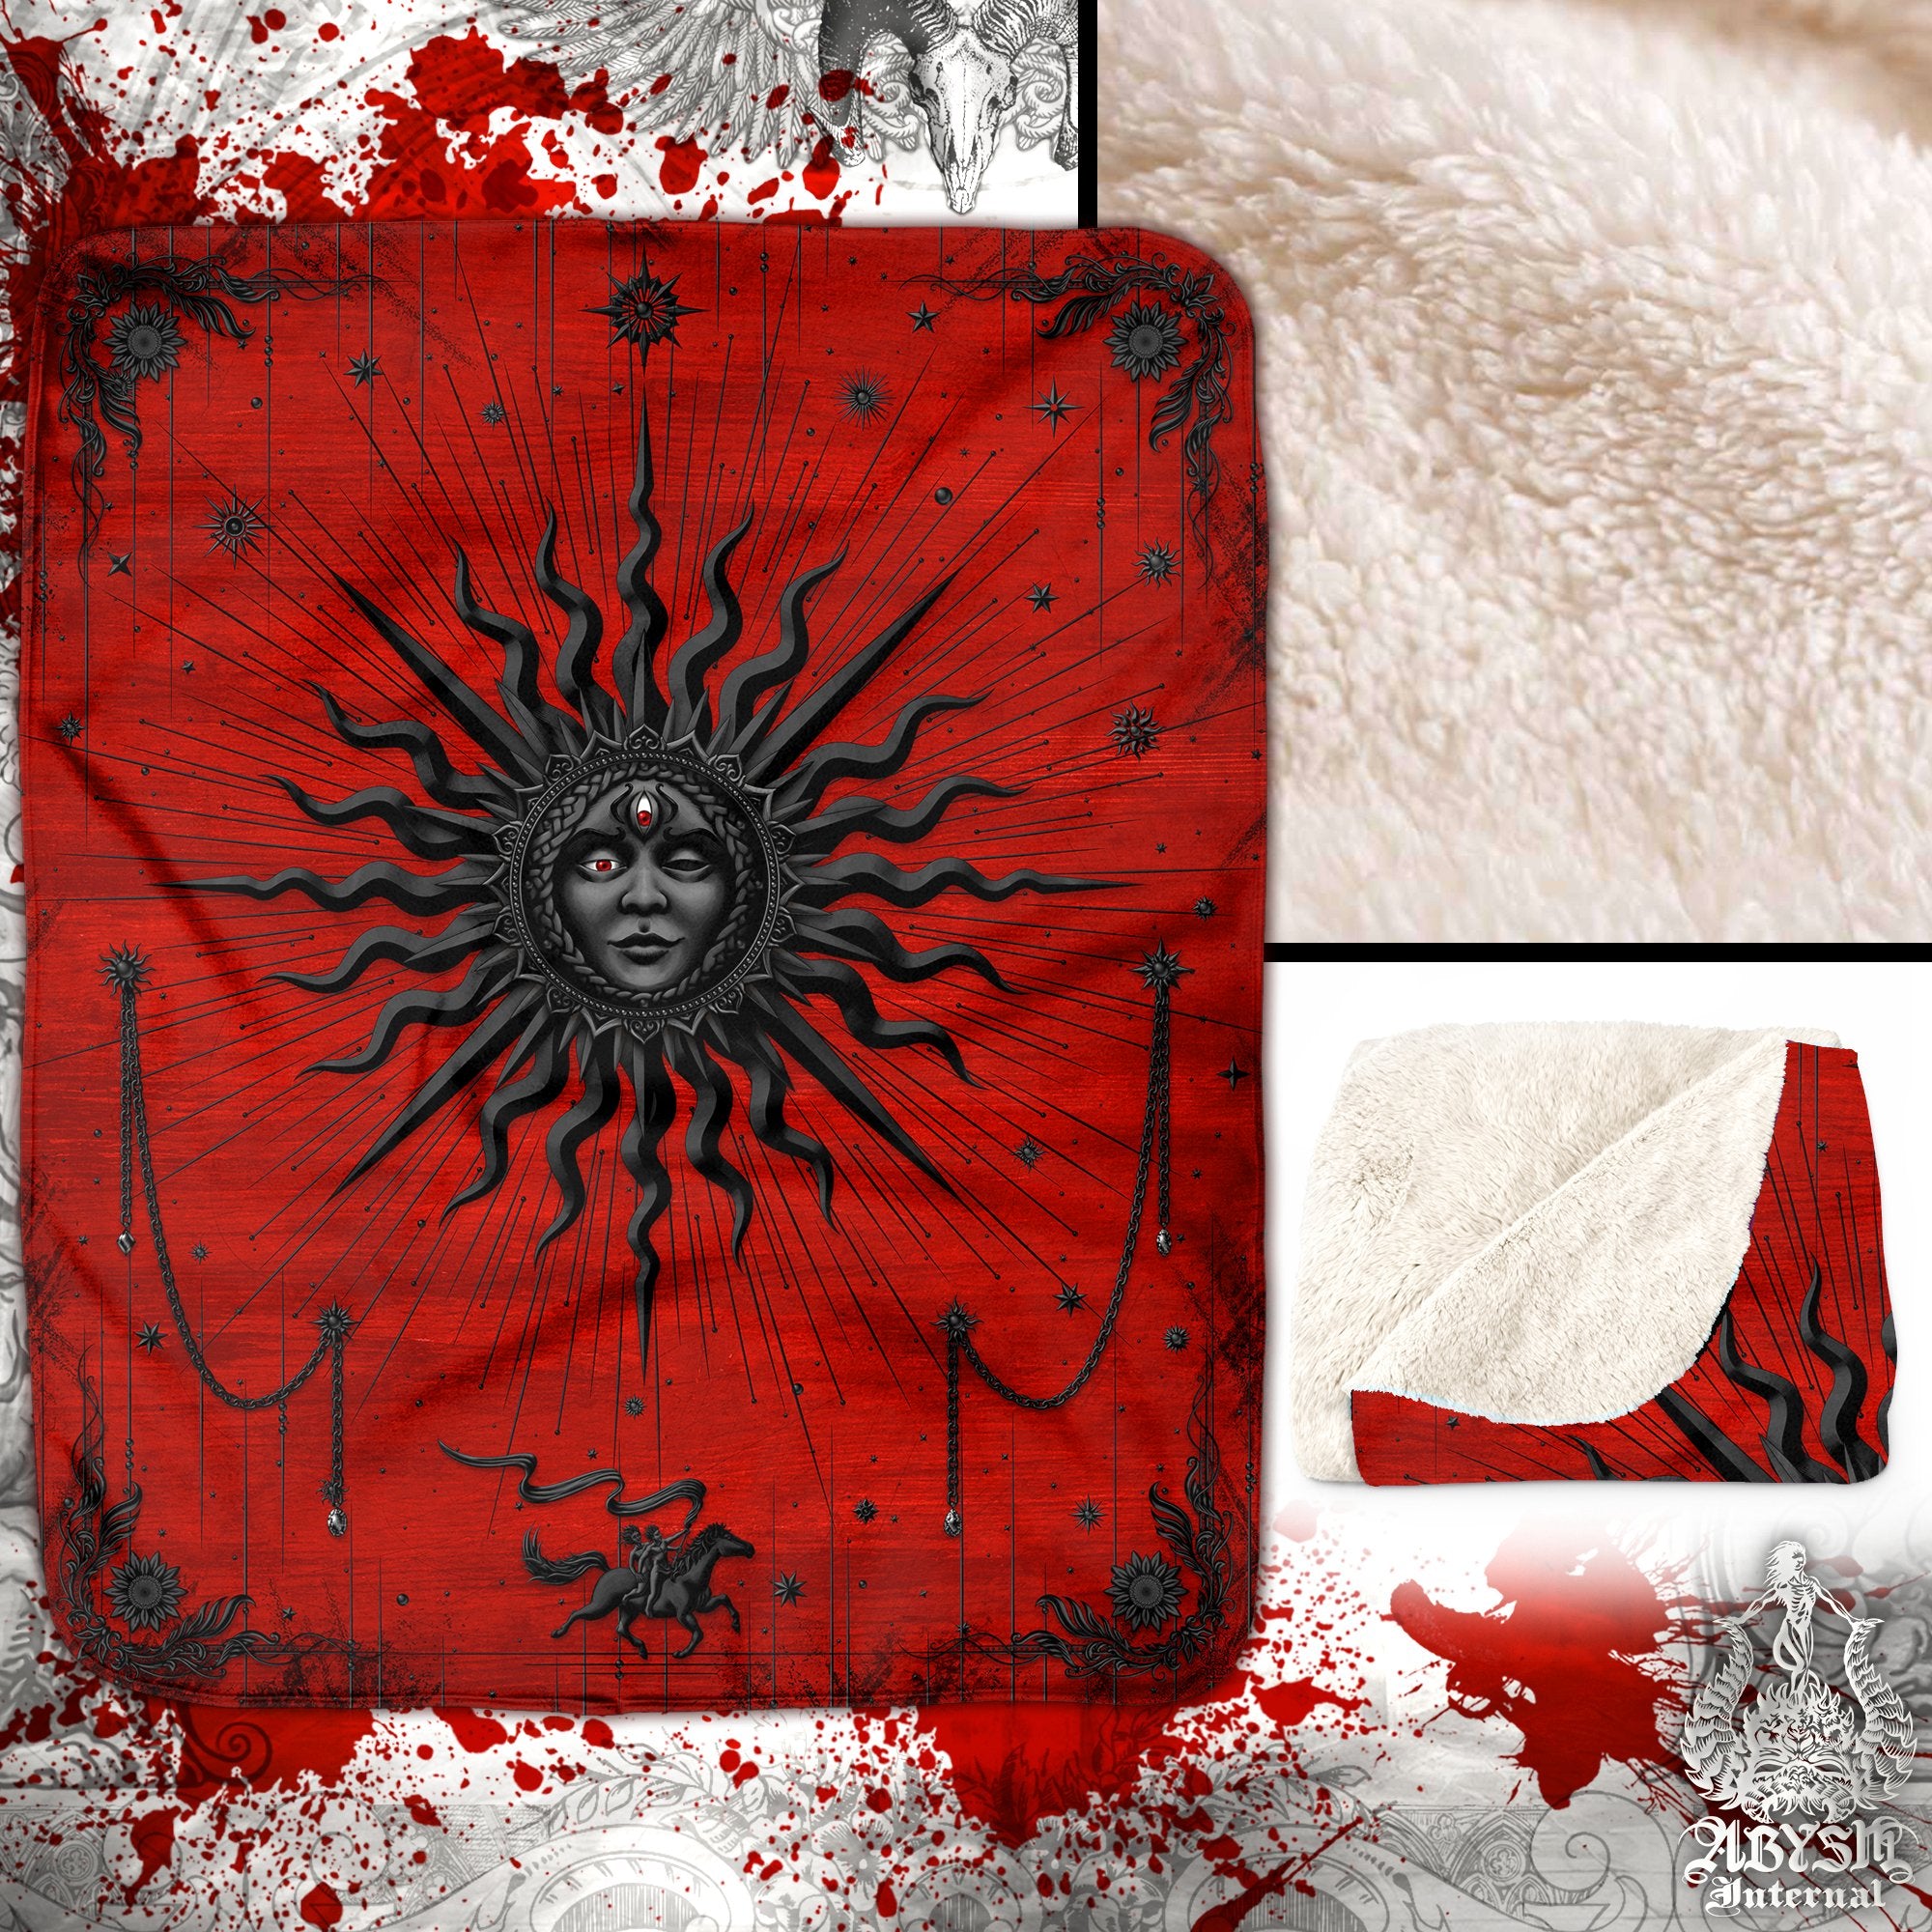 Bloody Gothic Sun Sherpa Fleece Throw Blanket, Tarot Arcana Art, Witch's Magic Esoteric Room, Goth Home Decor, Fortune Gift - Red Black - Abysm Internal